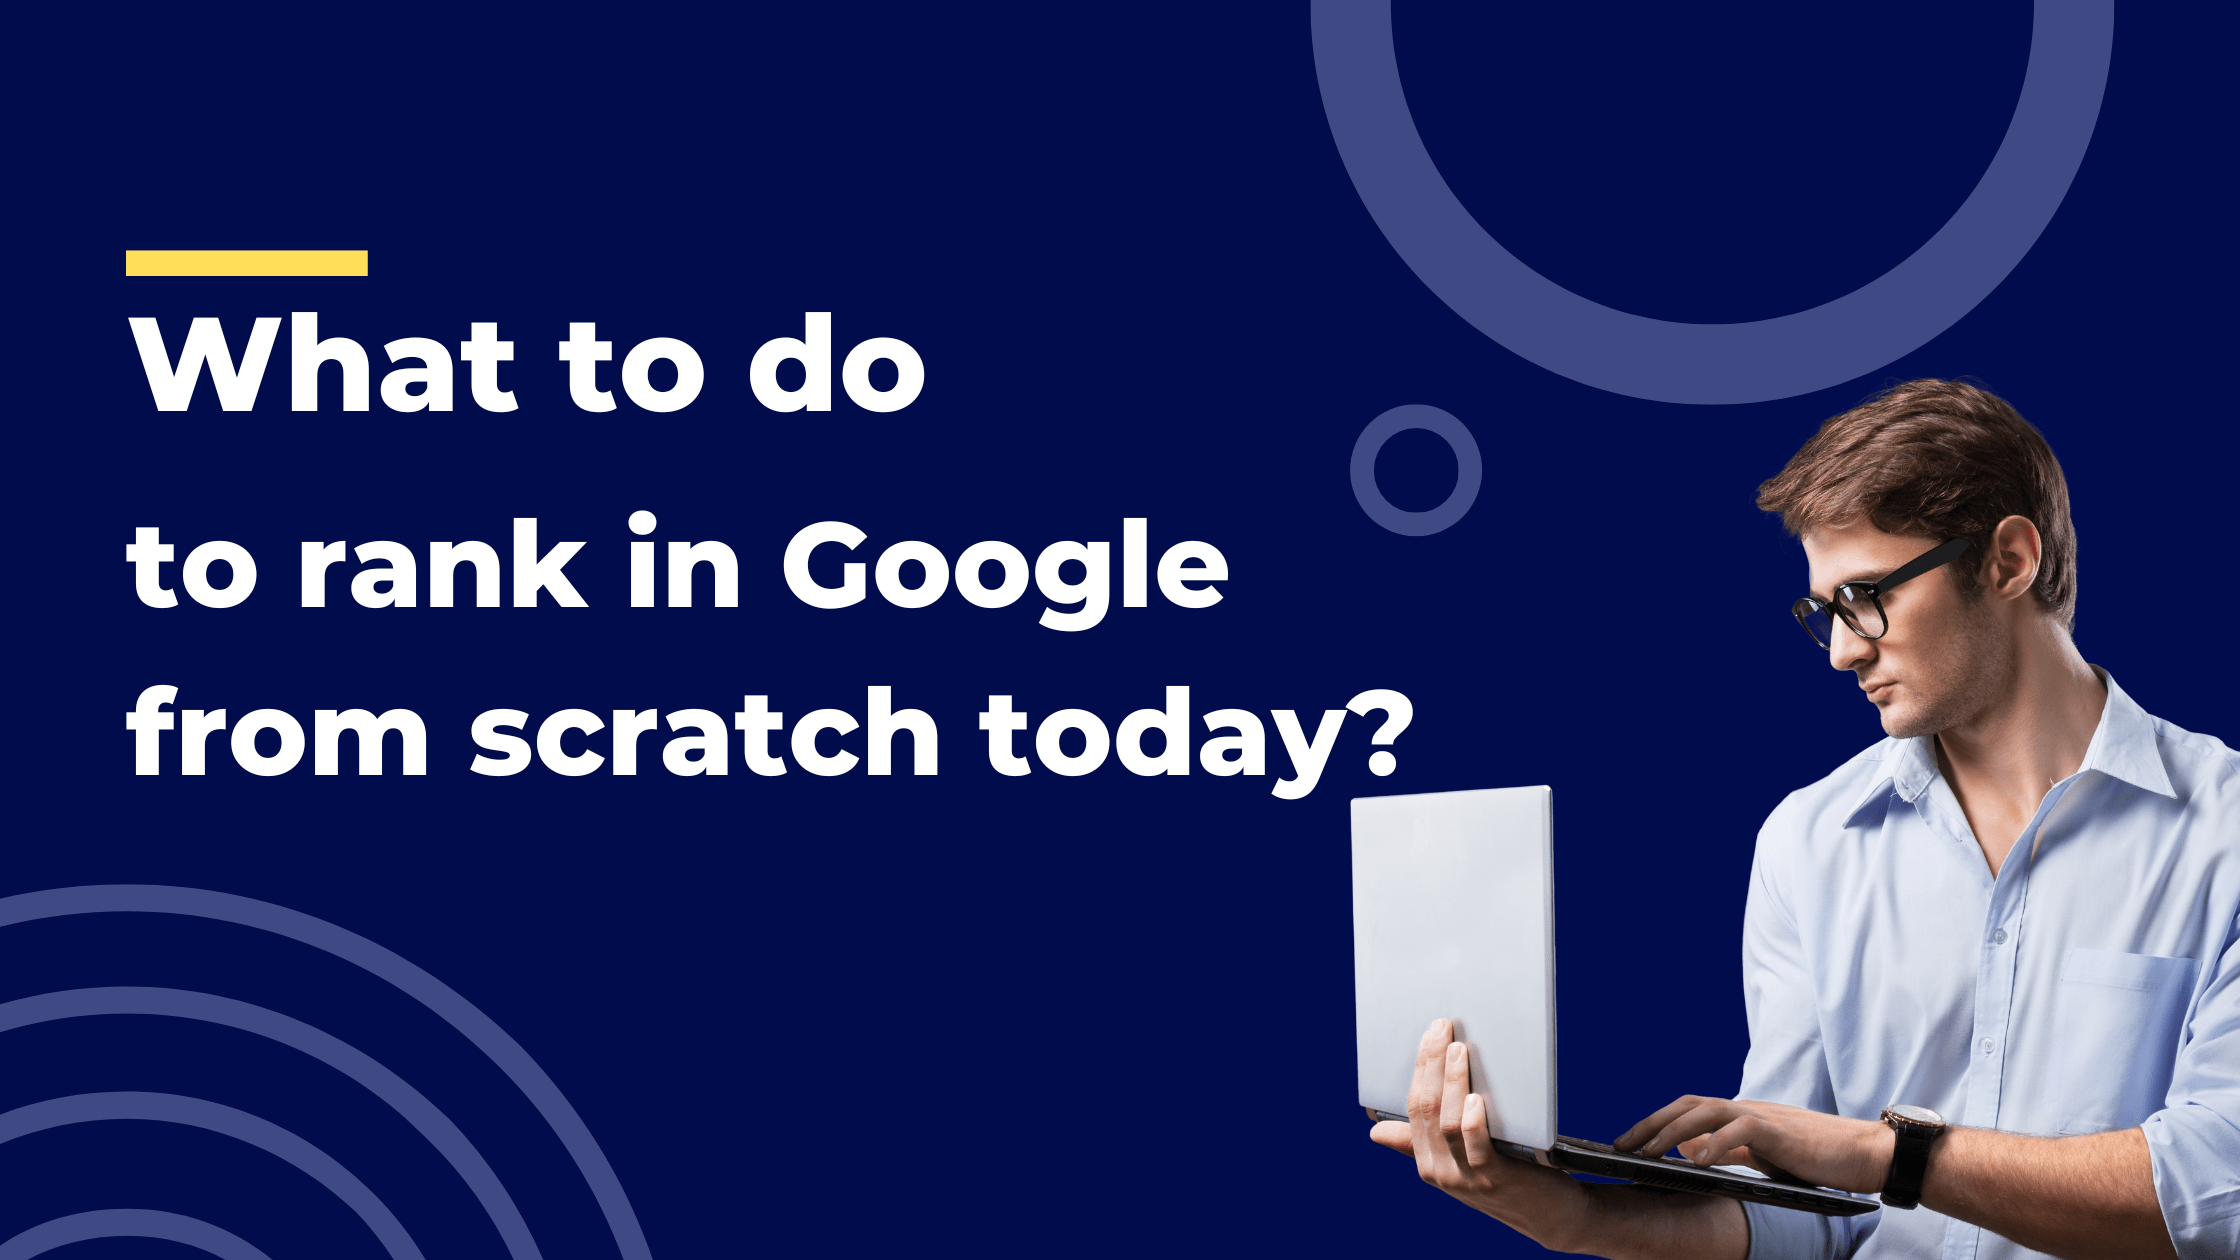 What to do to rank in Google from scratch today?